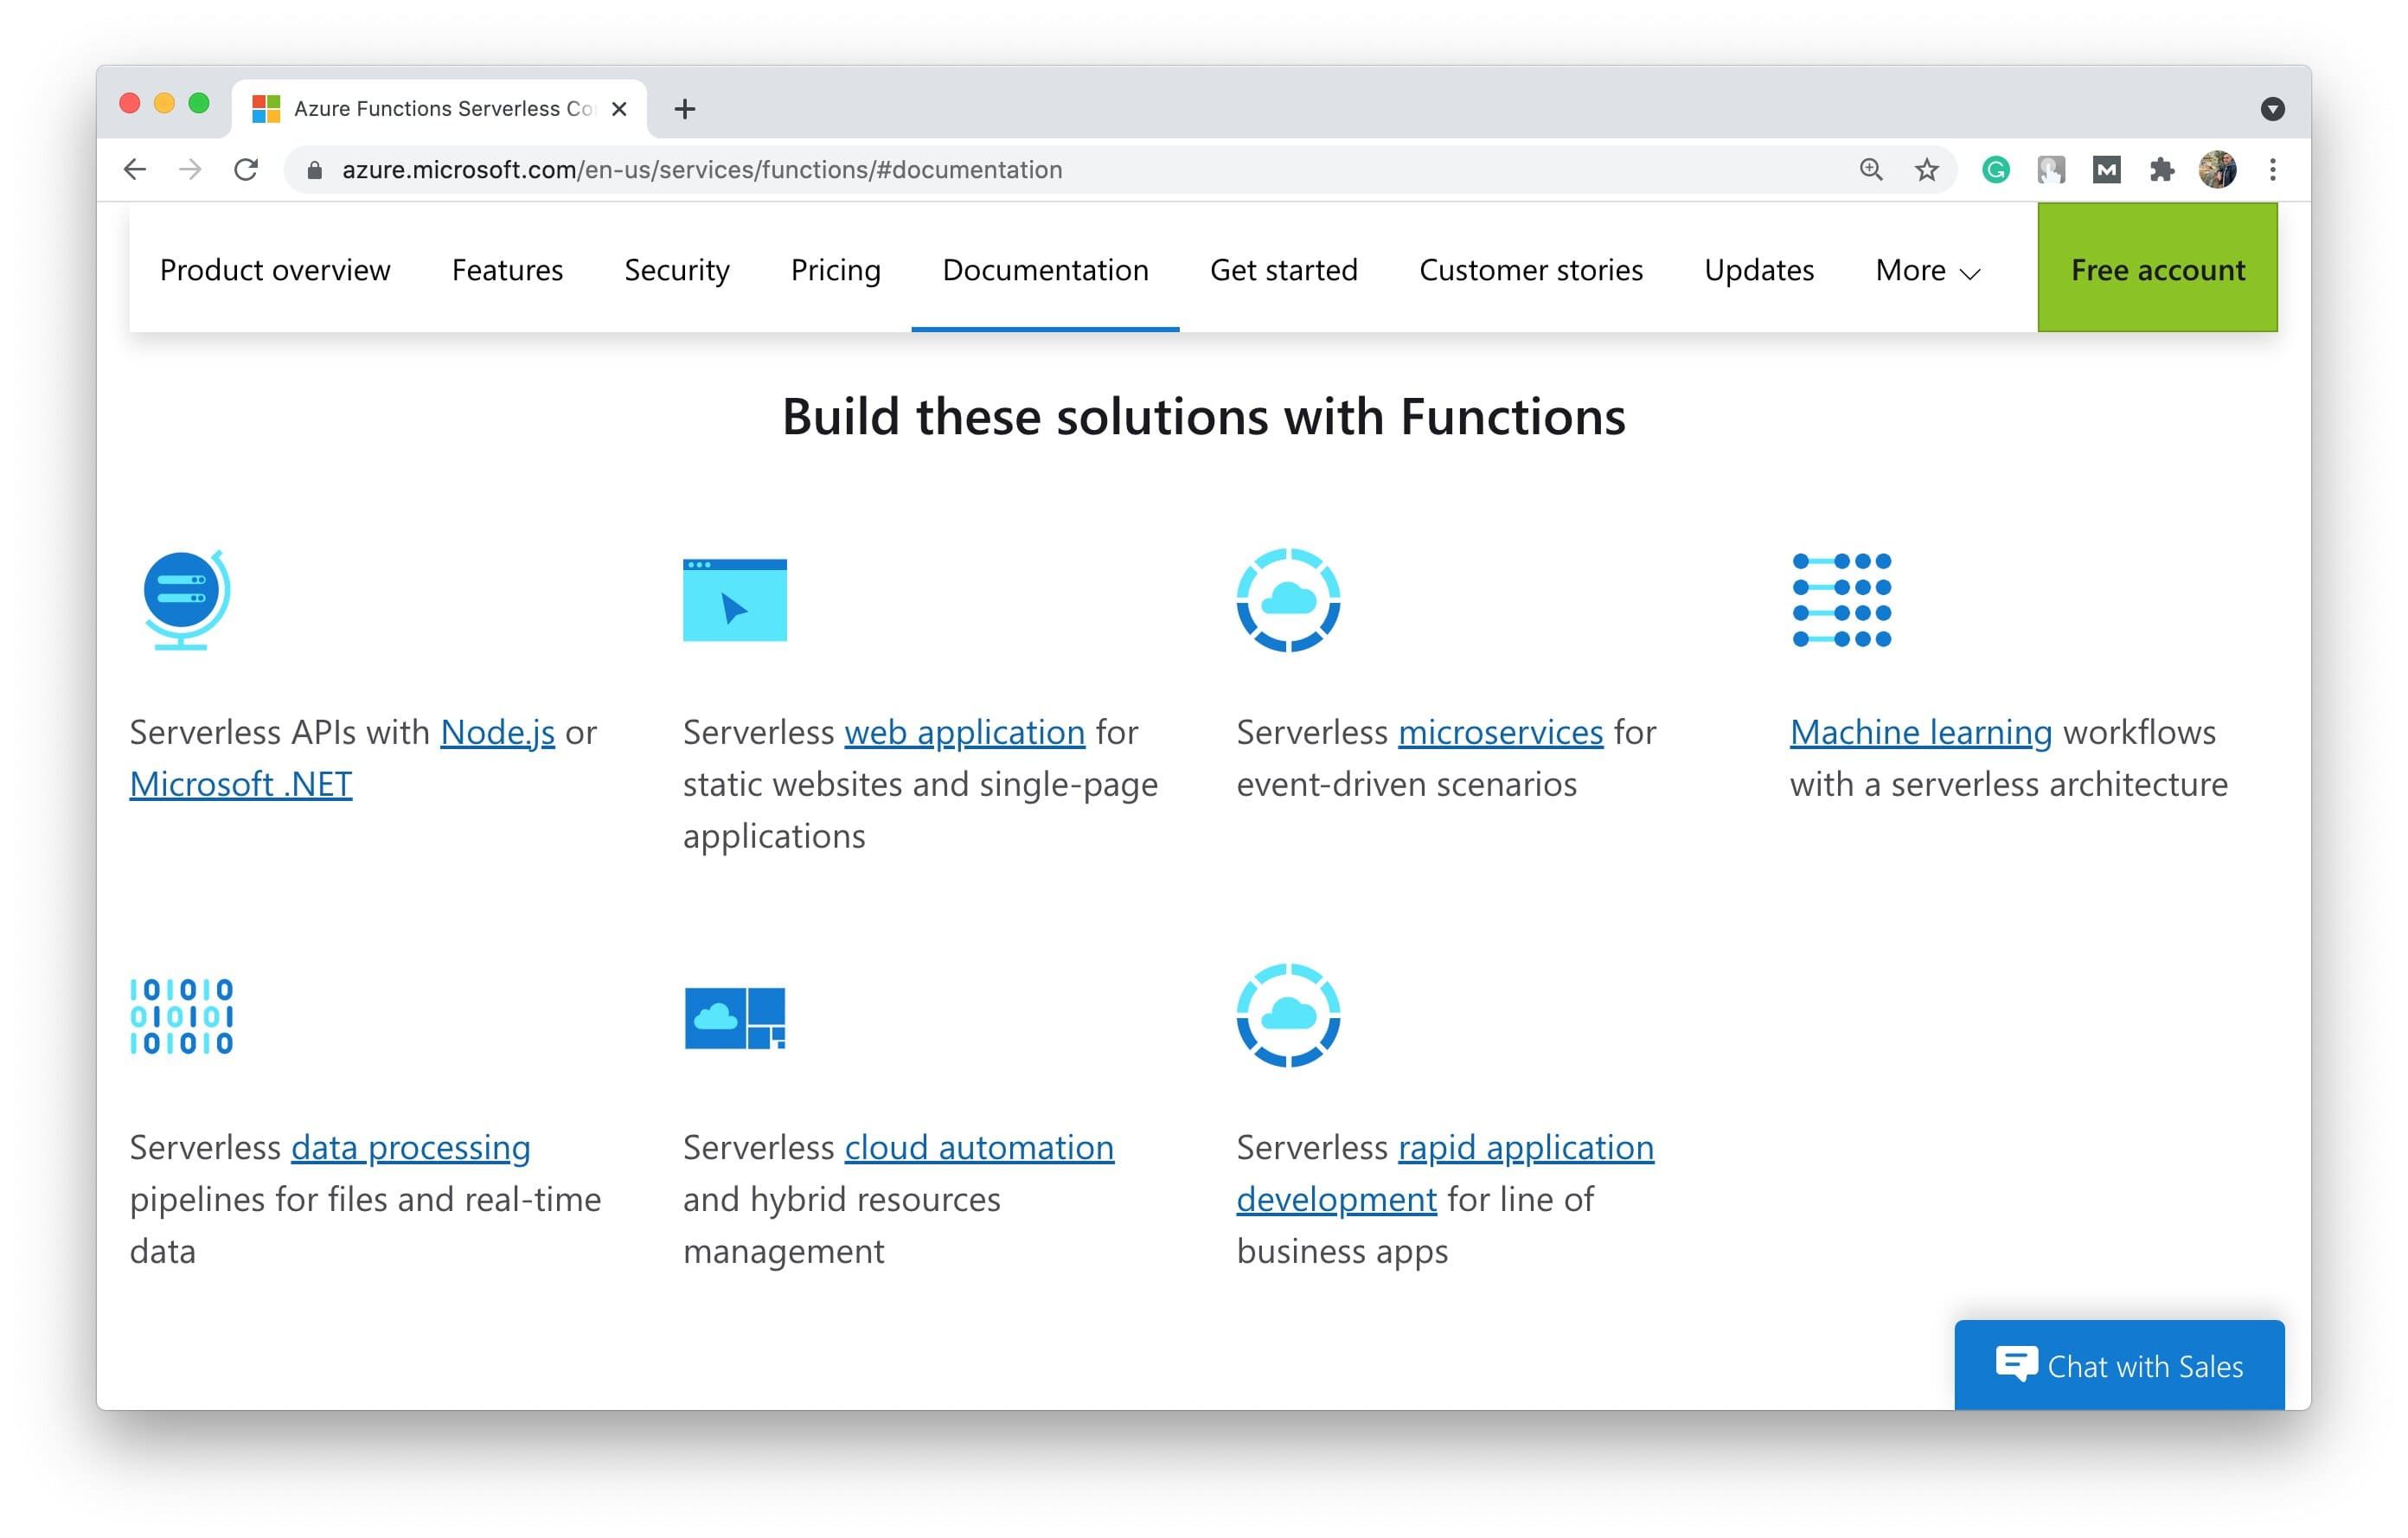 Cloud computing, serverless infrastructure, on-premises infrastructure — these are all parts of Azure set of servers options for their user groups (*image by [Azure](https://azure.microsoft.com/en-us/services/functions/){ rel="nofollow" target="_blank" .default-md}*)